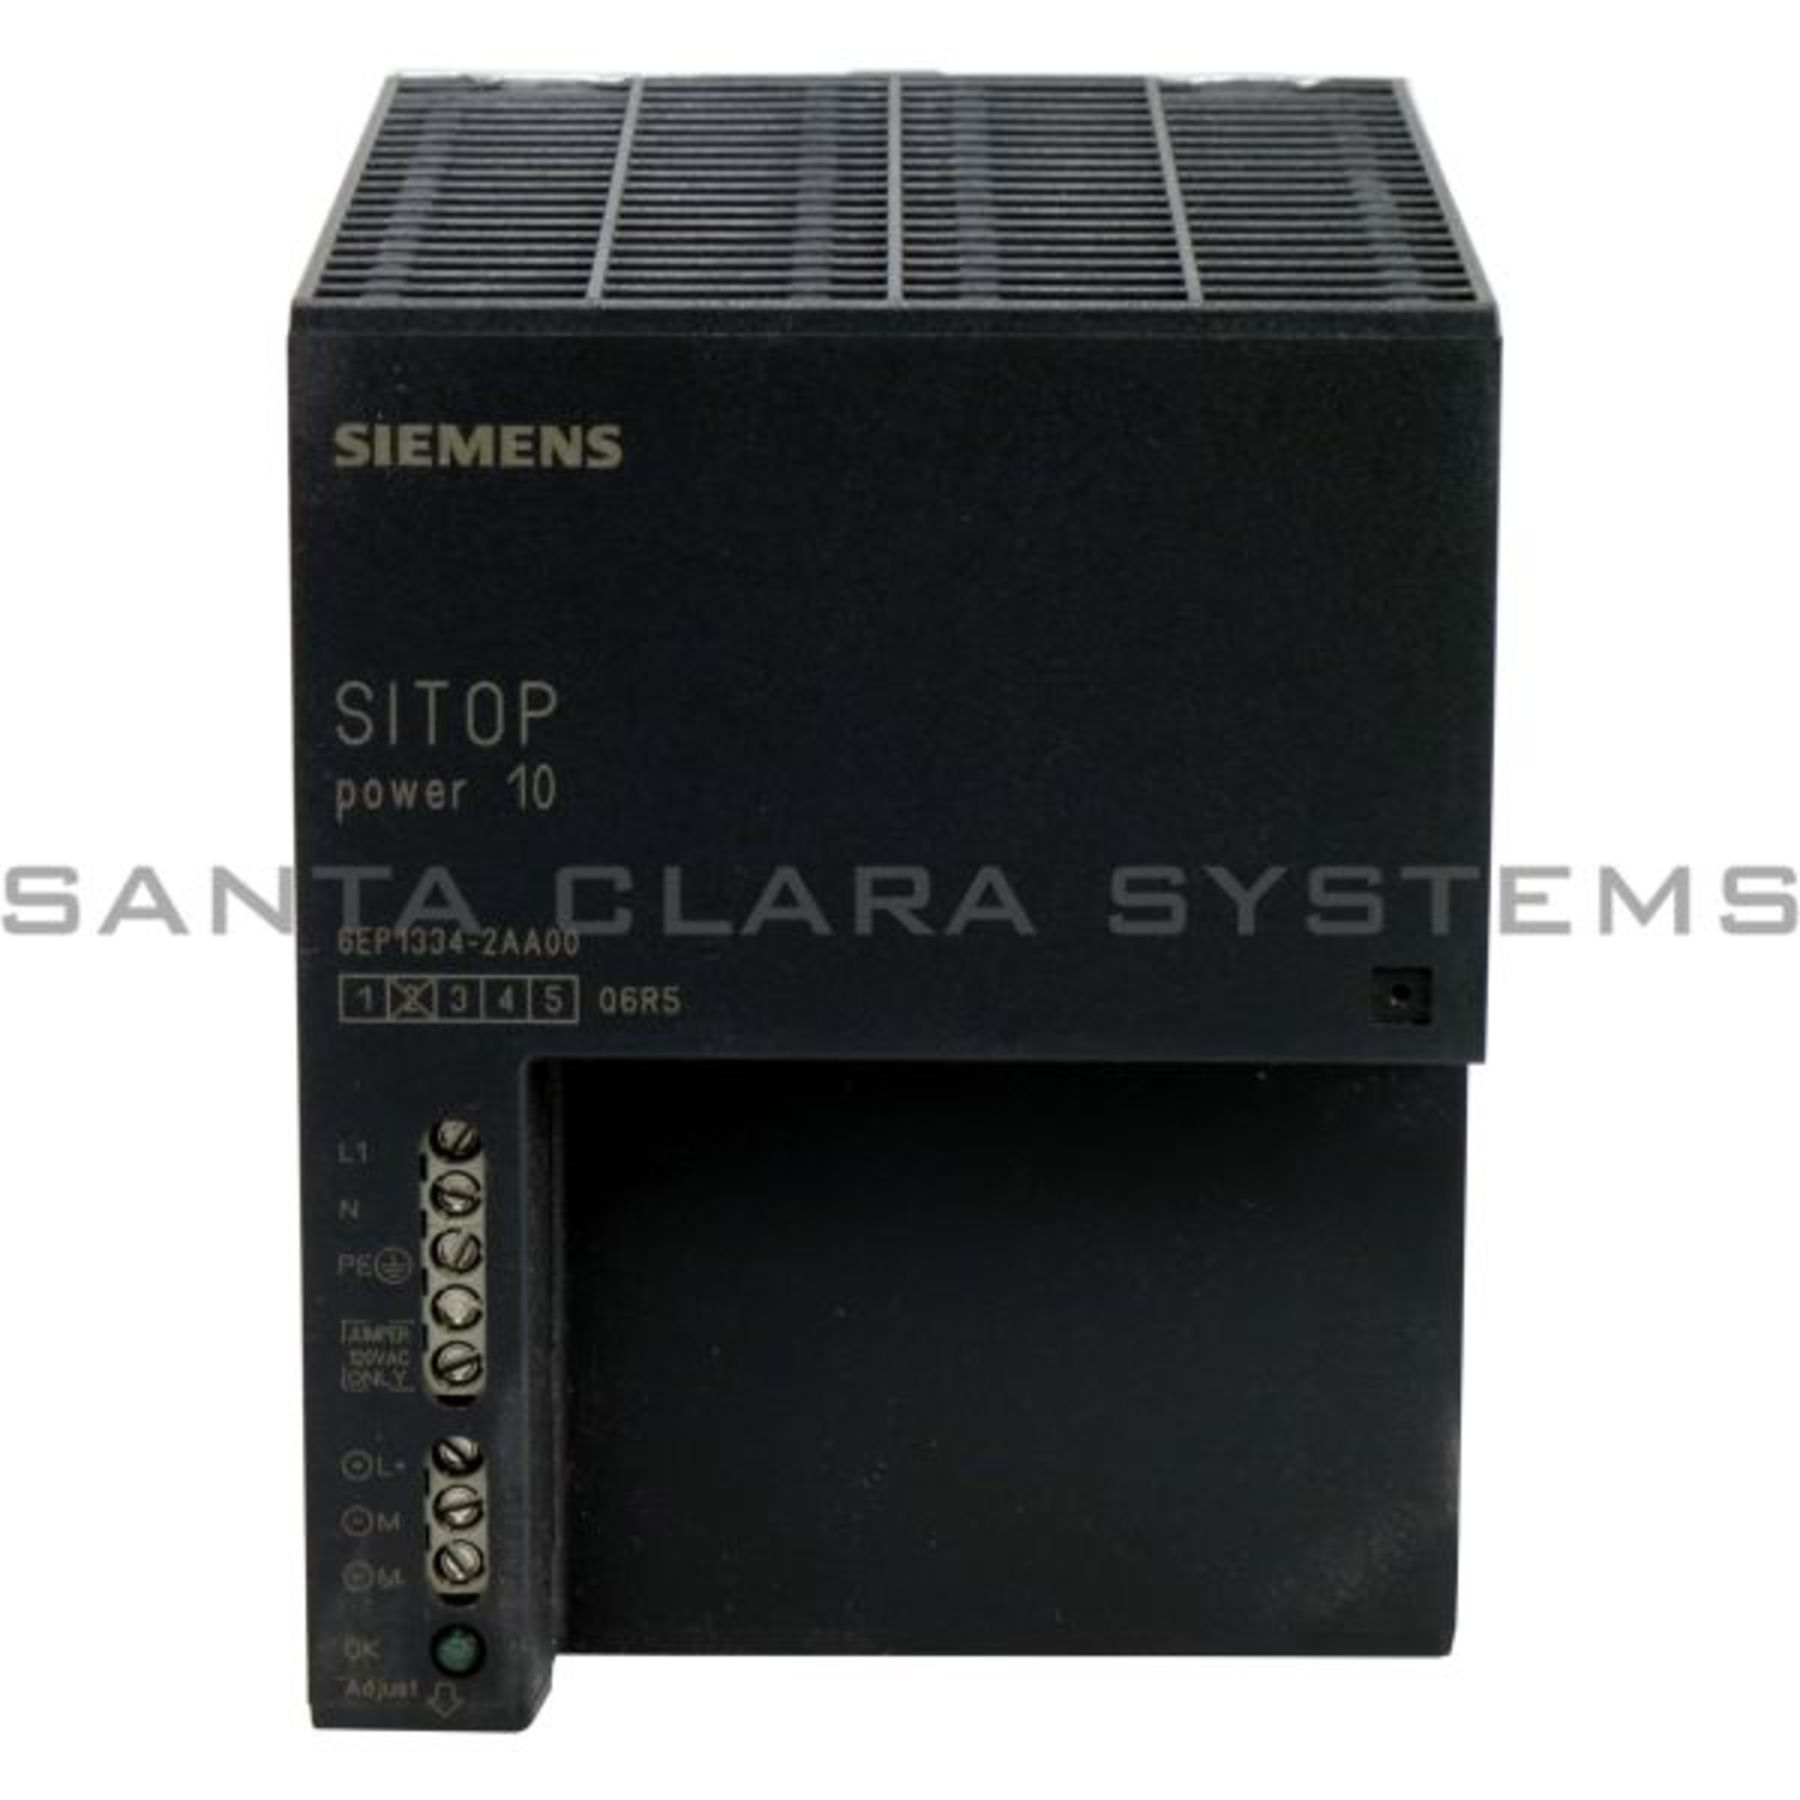 1pc Siemens Power Supply 6ep1 334-2ba20 6ep1334-2ba20 1 Year for sale online